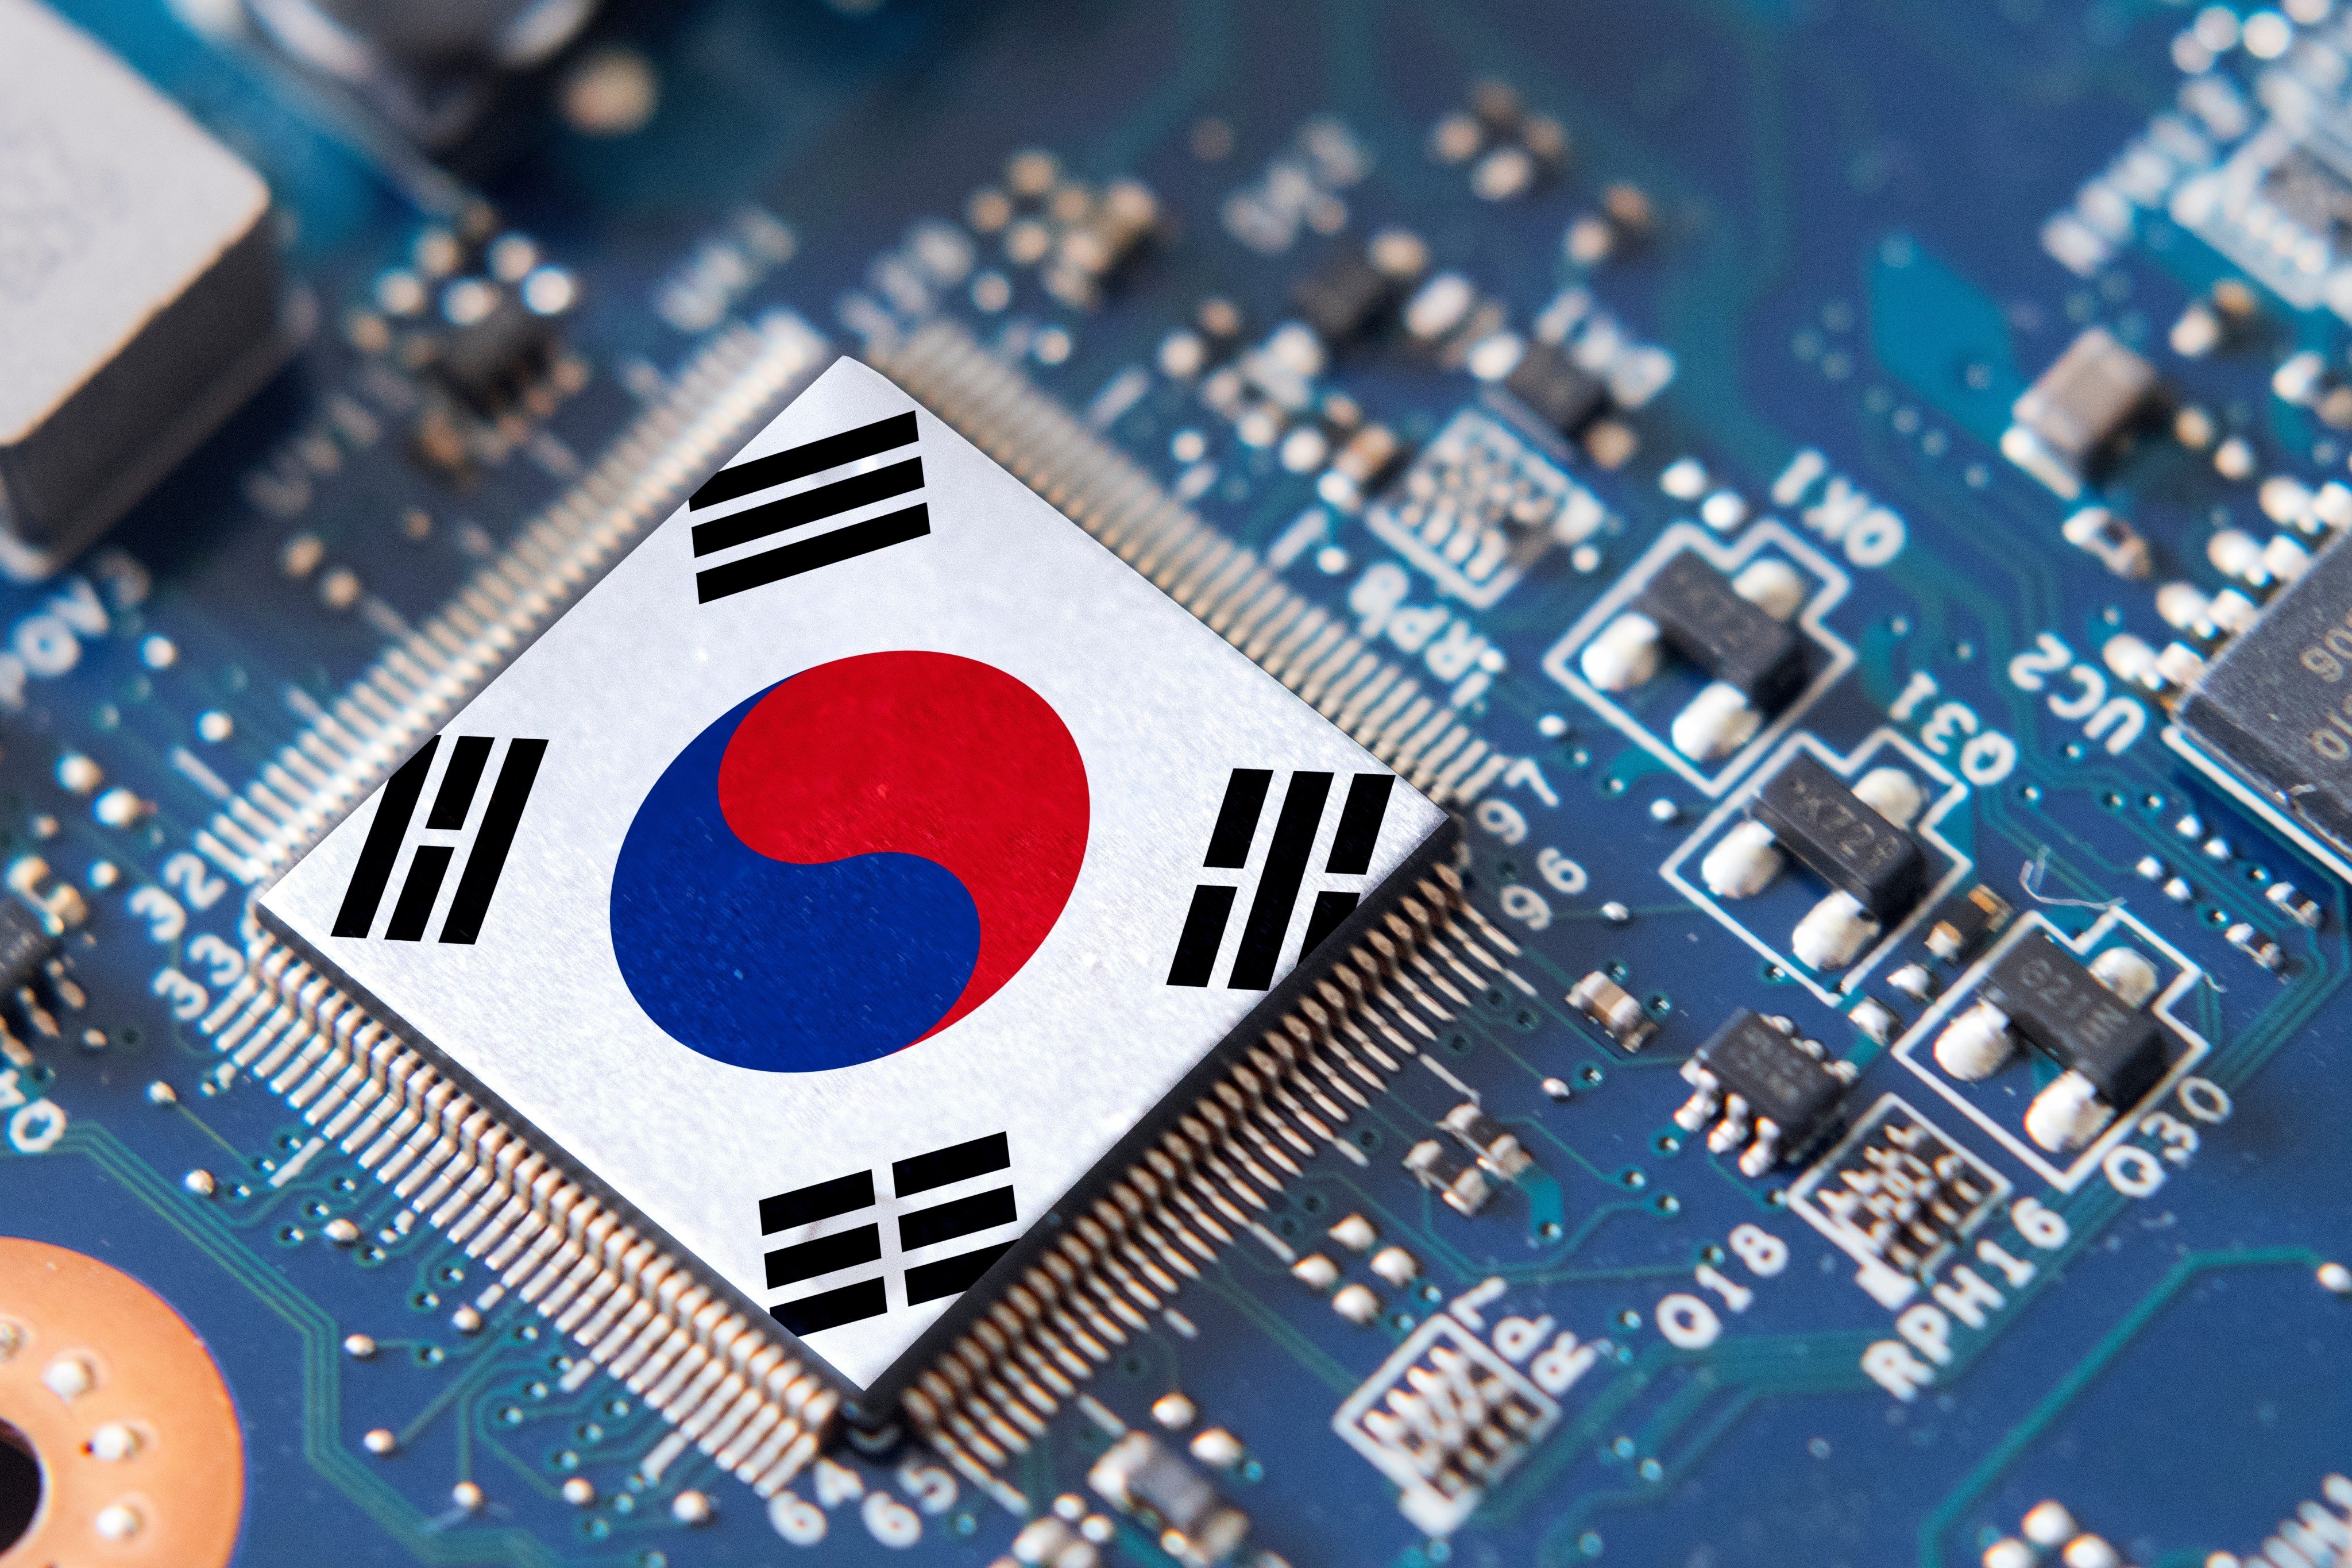 South Korea has fallen behind some rivals in areas such as semiconductor design and contract manufacturing. Photo: Shutterstock